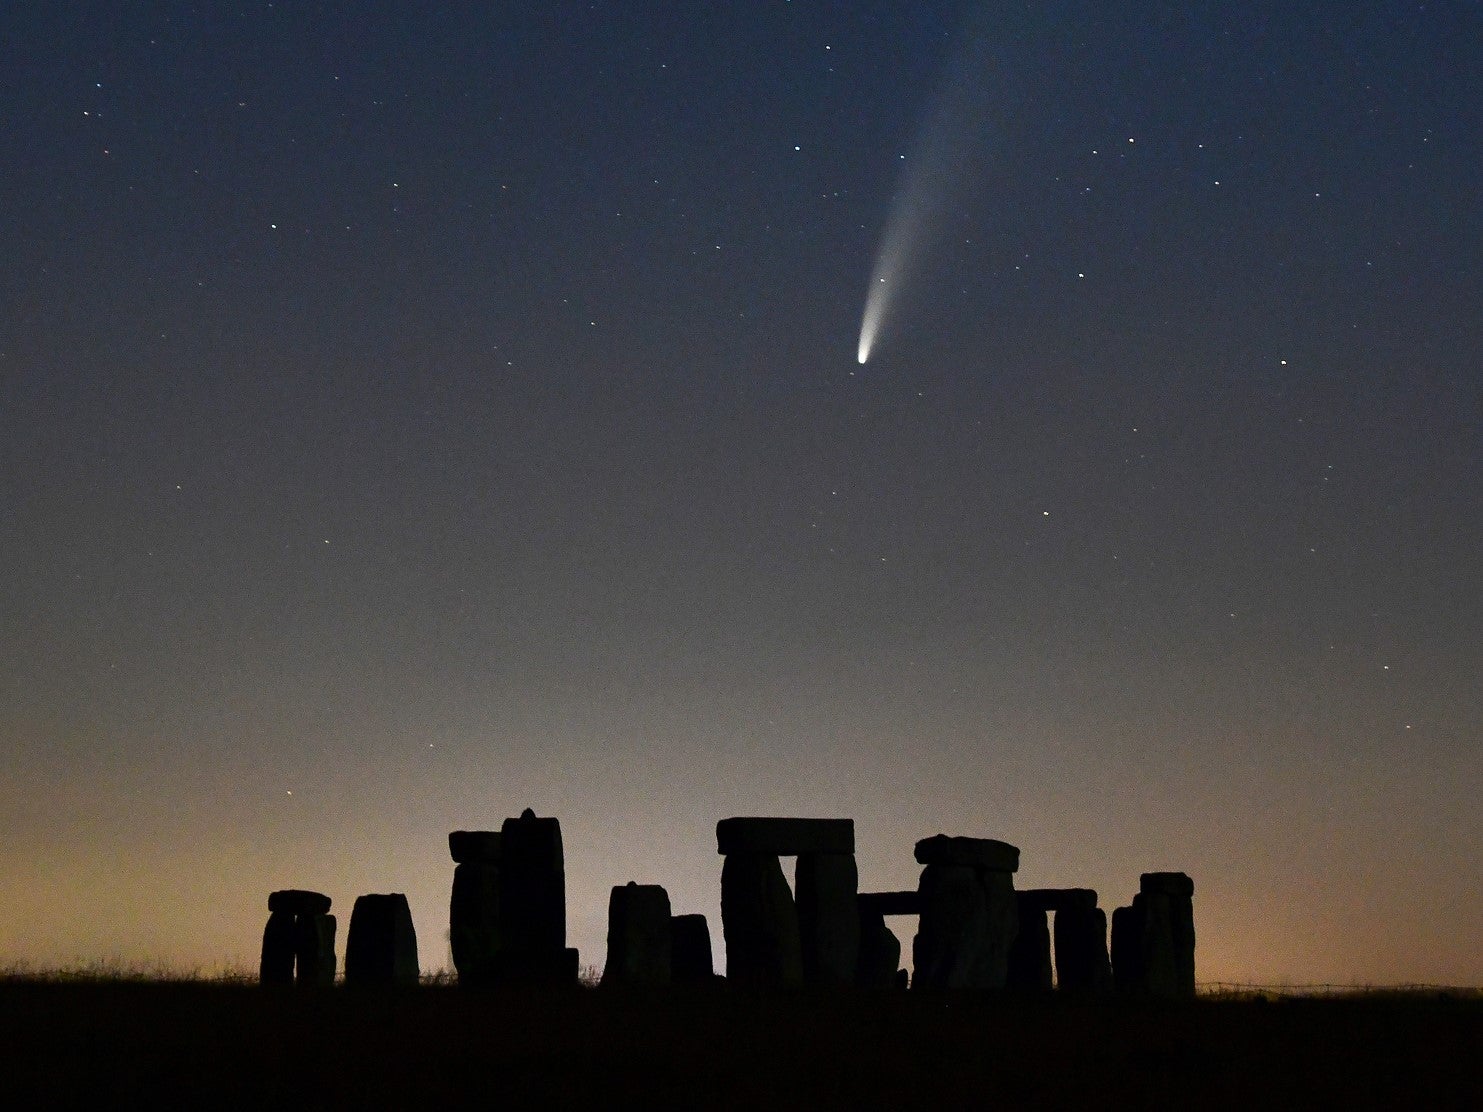 The winter solstice falls on 21 December, 2021, coinciding with the Ursid meteor shower